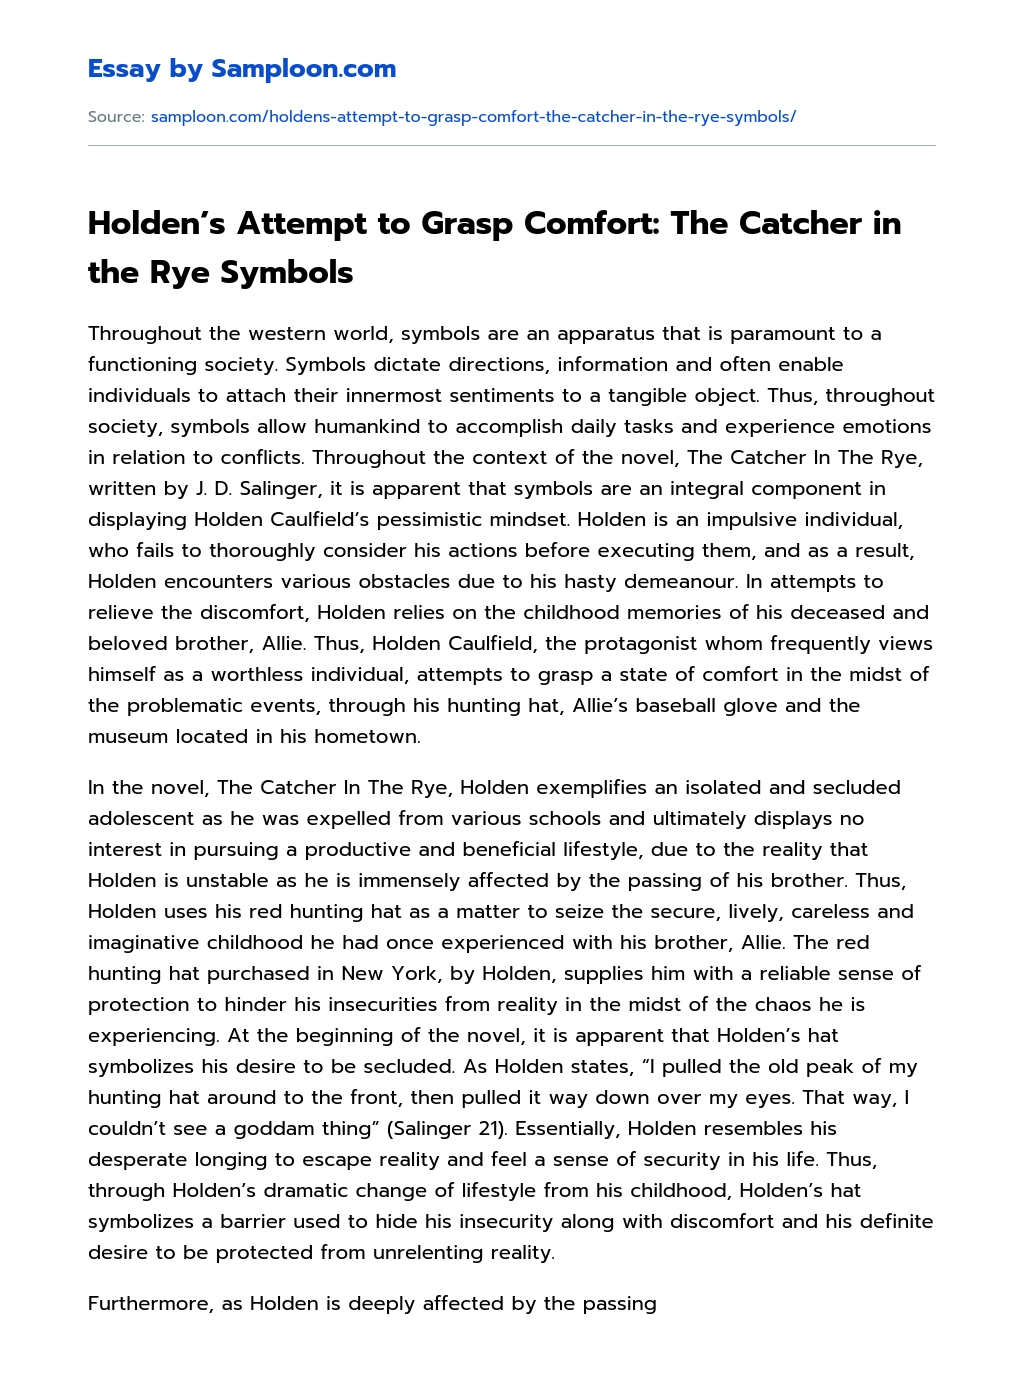 Holden’s Attempt to Grasp Comfort: The Catcher in the Rye Symbols essay